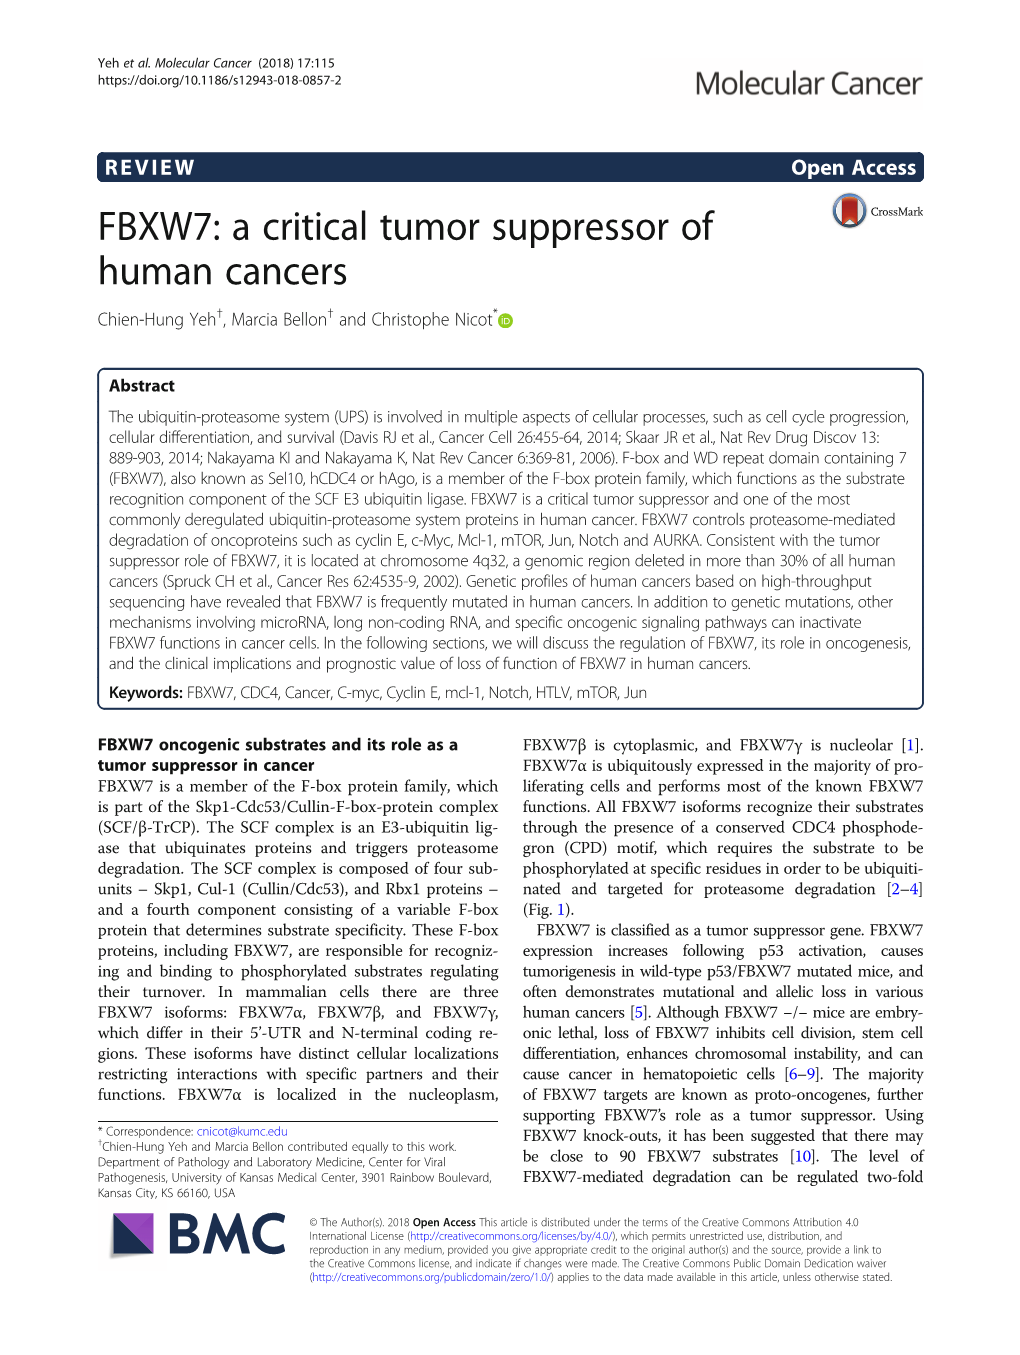 FBXW7: a Critical Tumor Suppressor of Human Cancers Chien-Hung Yeh†, Marcia Bellon† and Christophe Nicot*